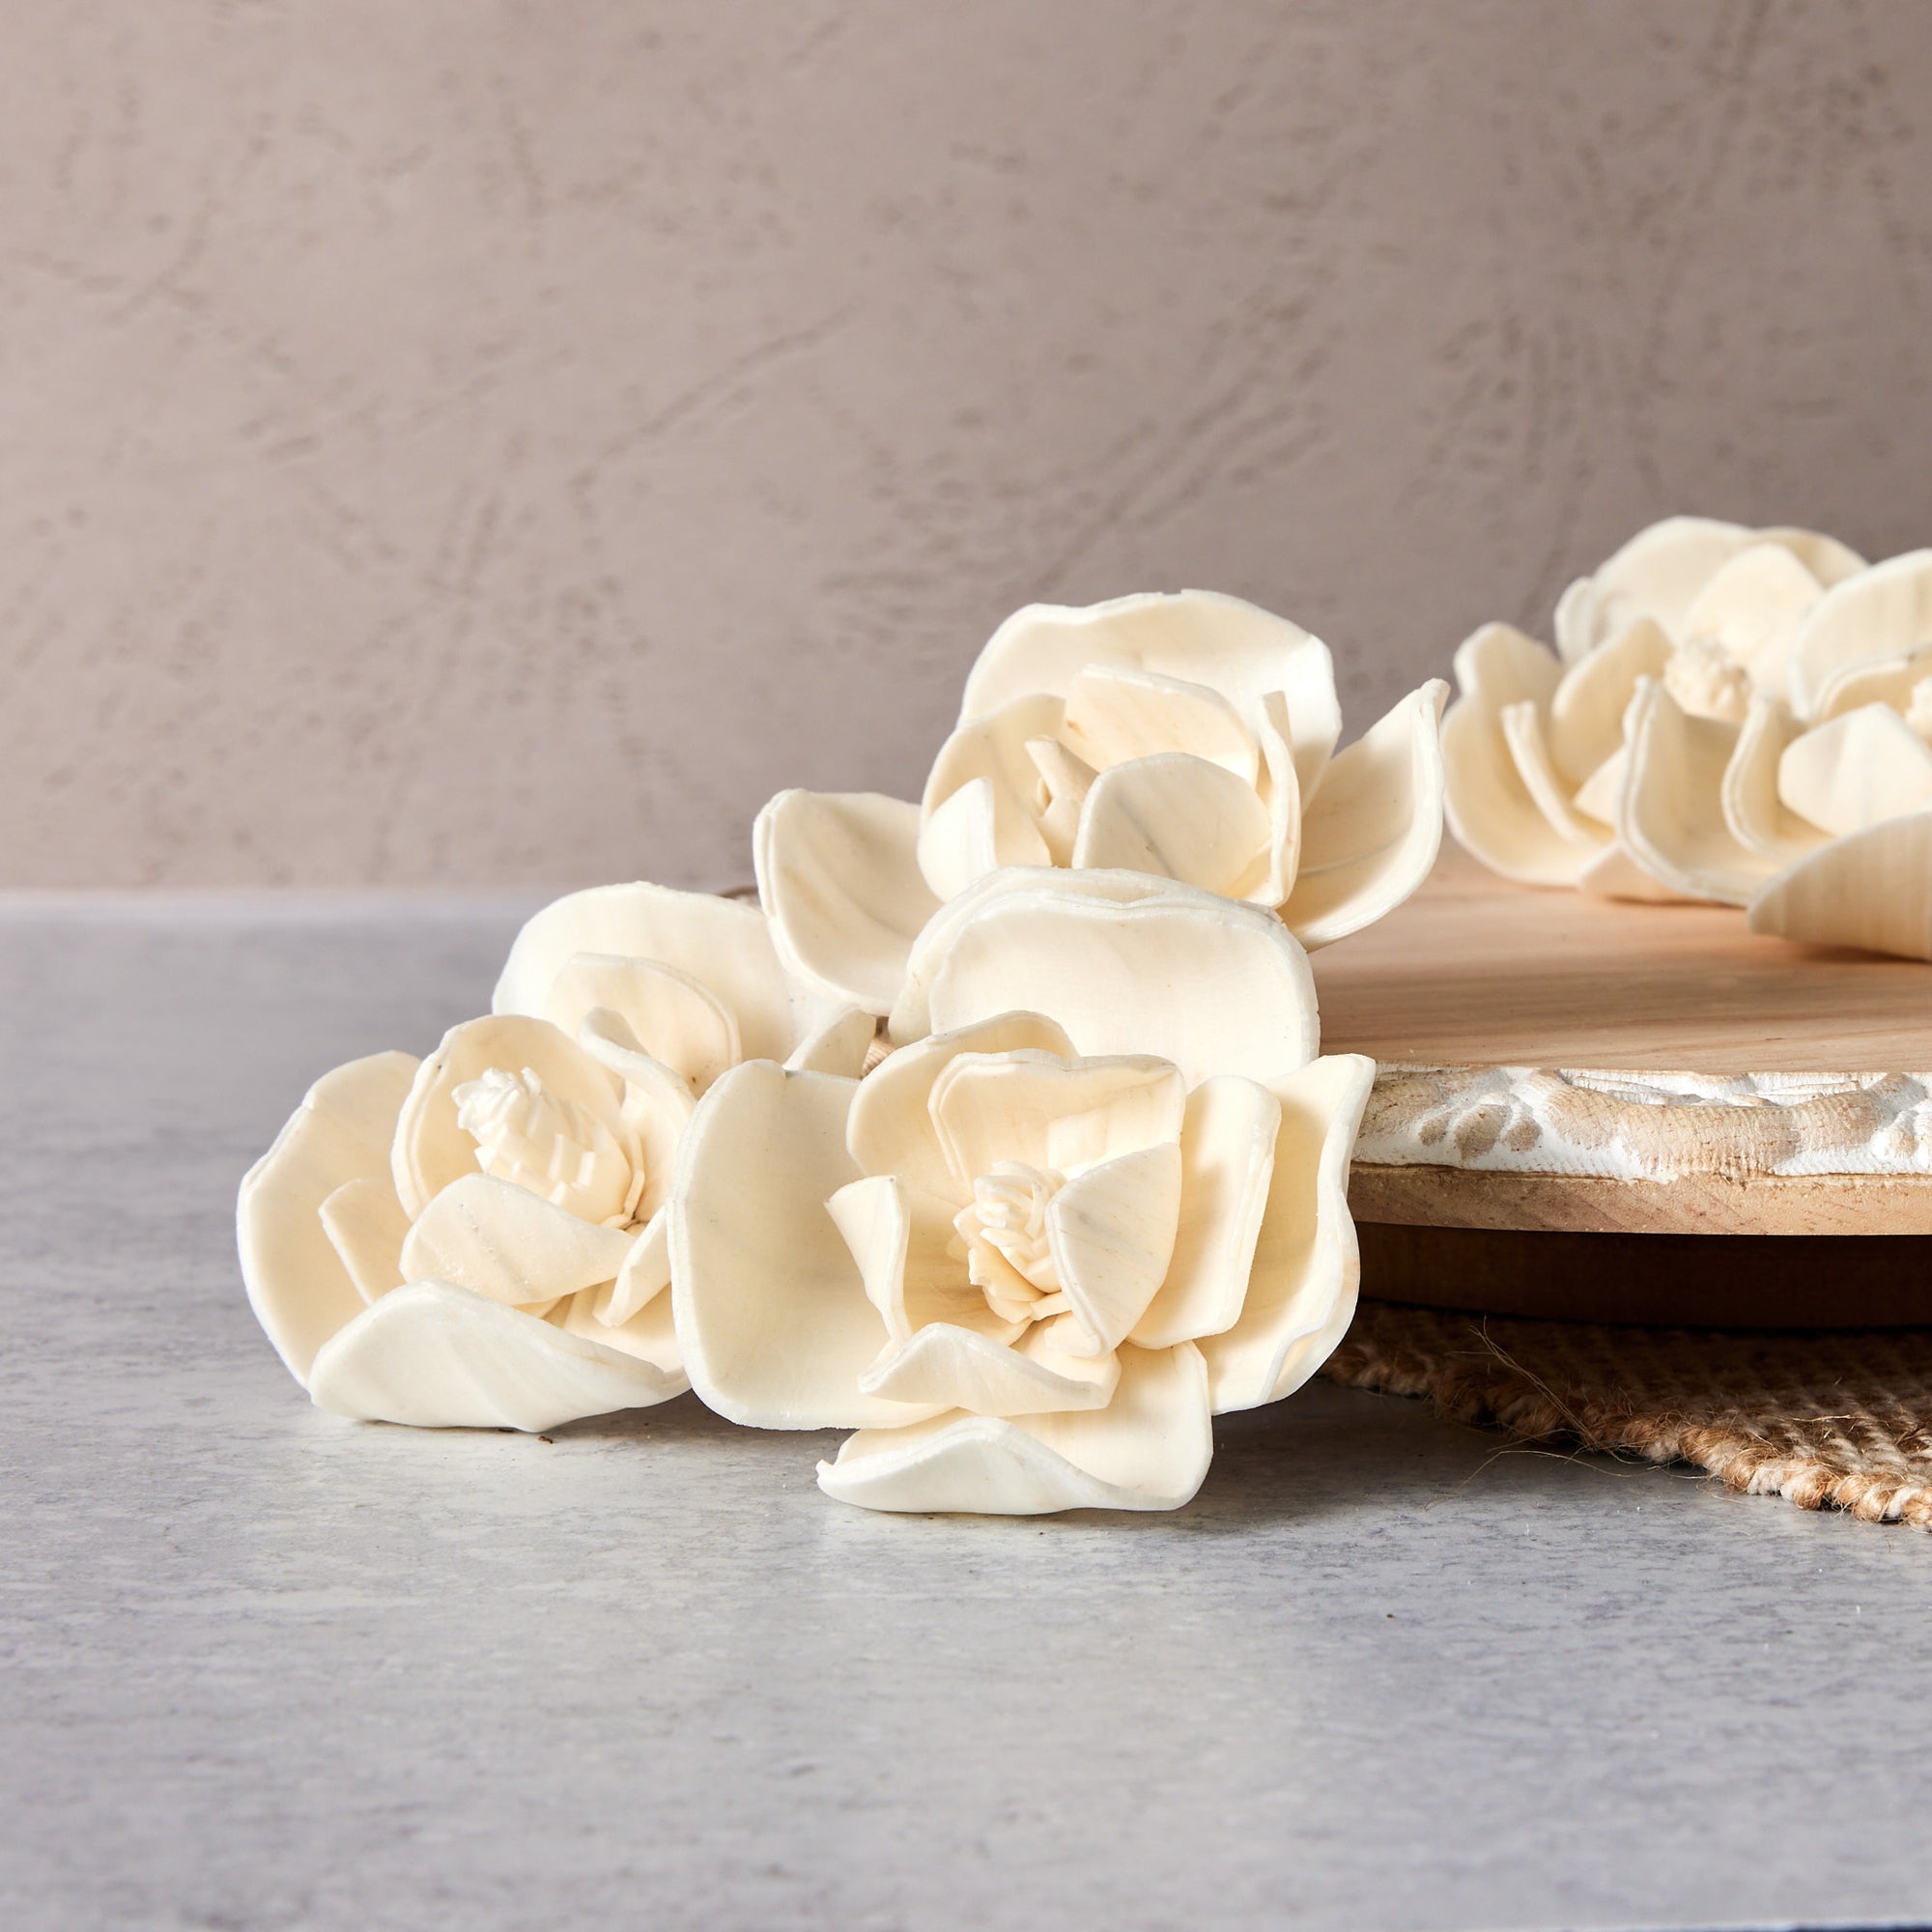 Magnolia Flower  - set of 12 - 2.5 inches